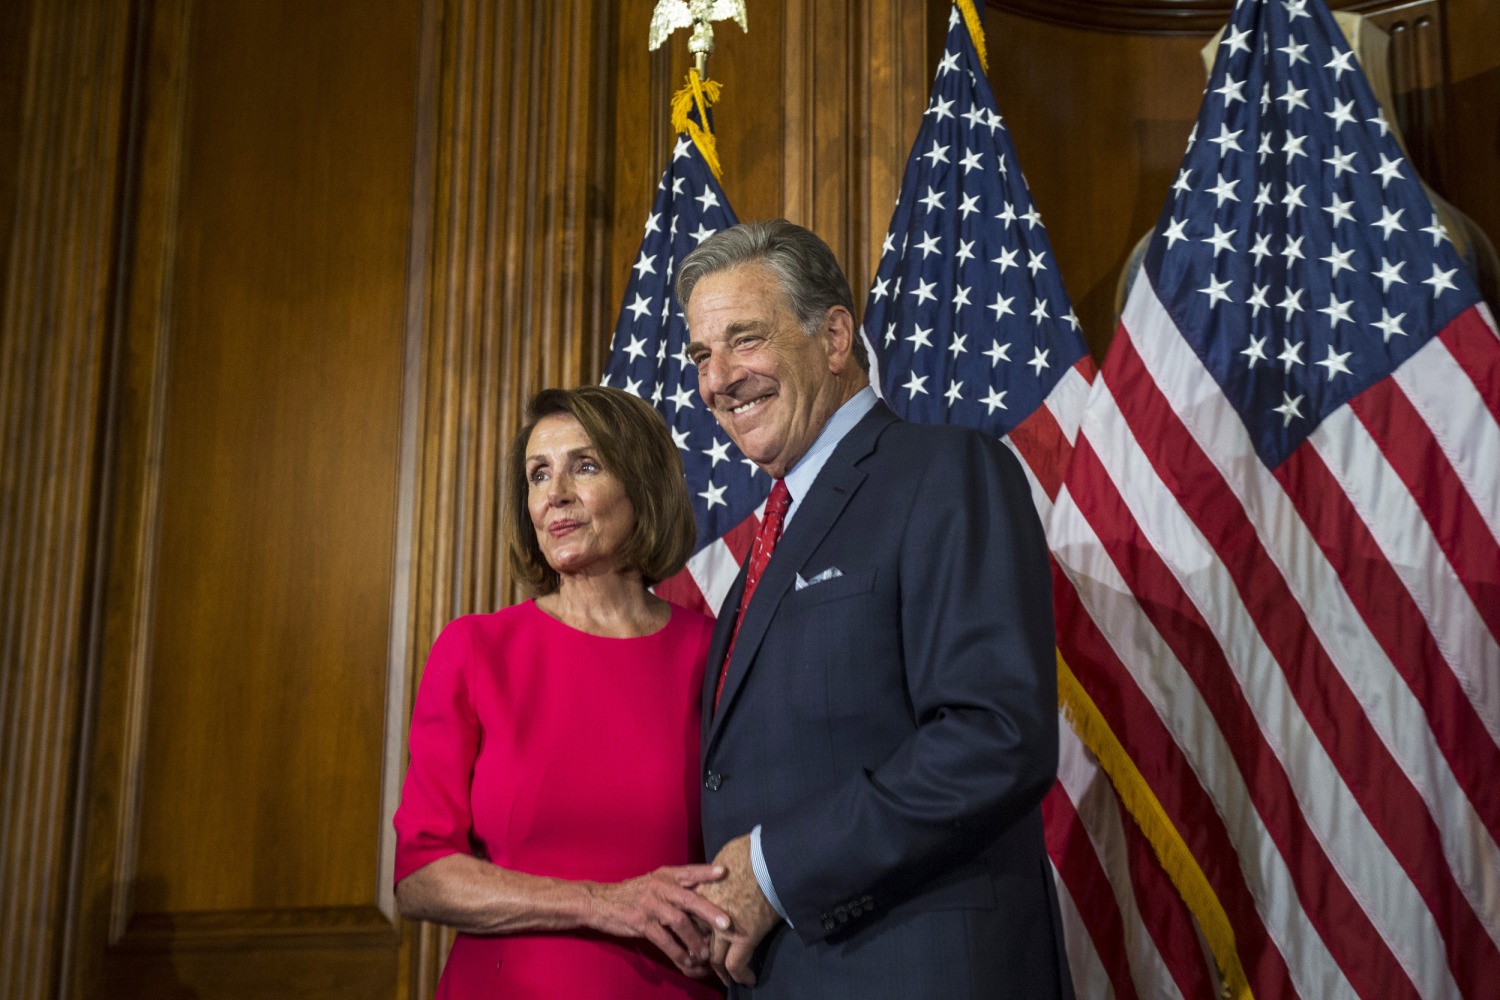 Nancy Pelosi’s husband pleads guilty to DUI charge, sentenced to 5 days in jail